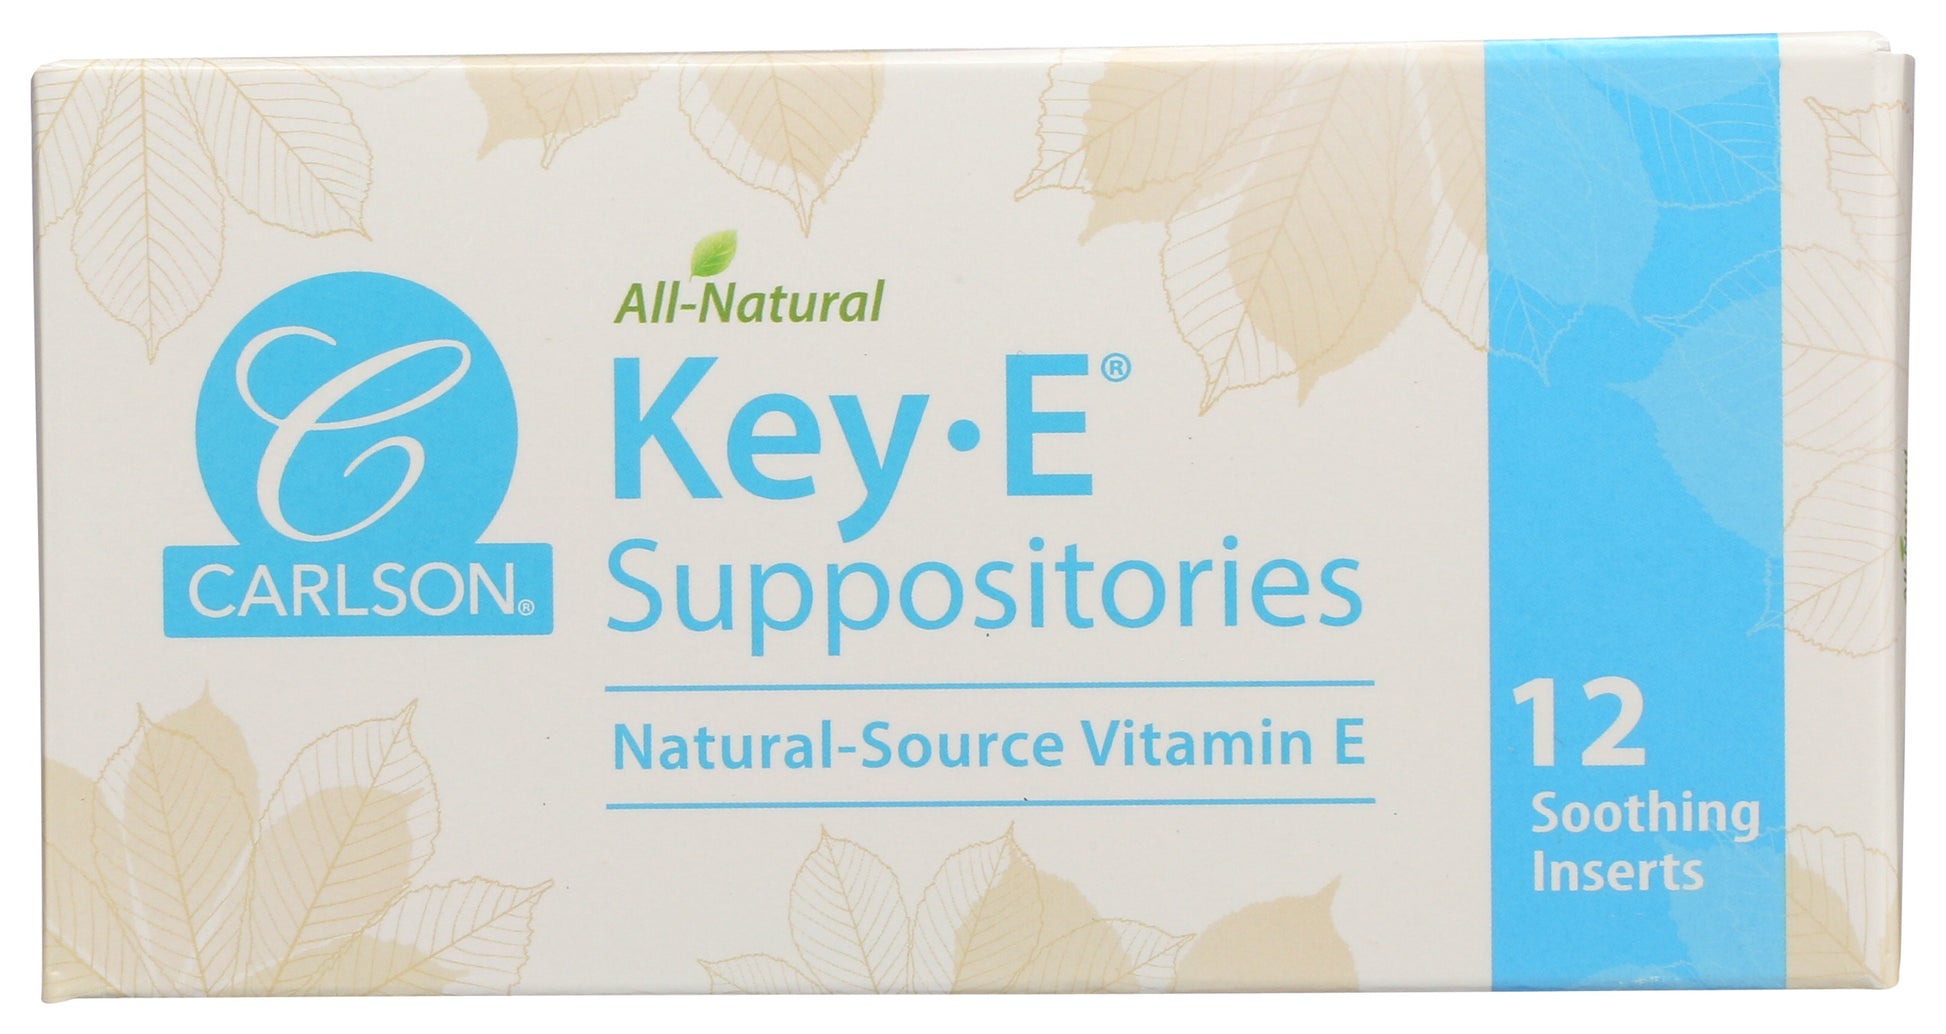 Carlson Key E Suppositories 12 Vitamin E Soothing Inserts Front